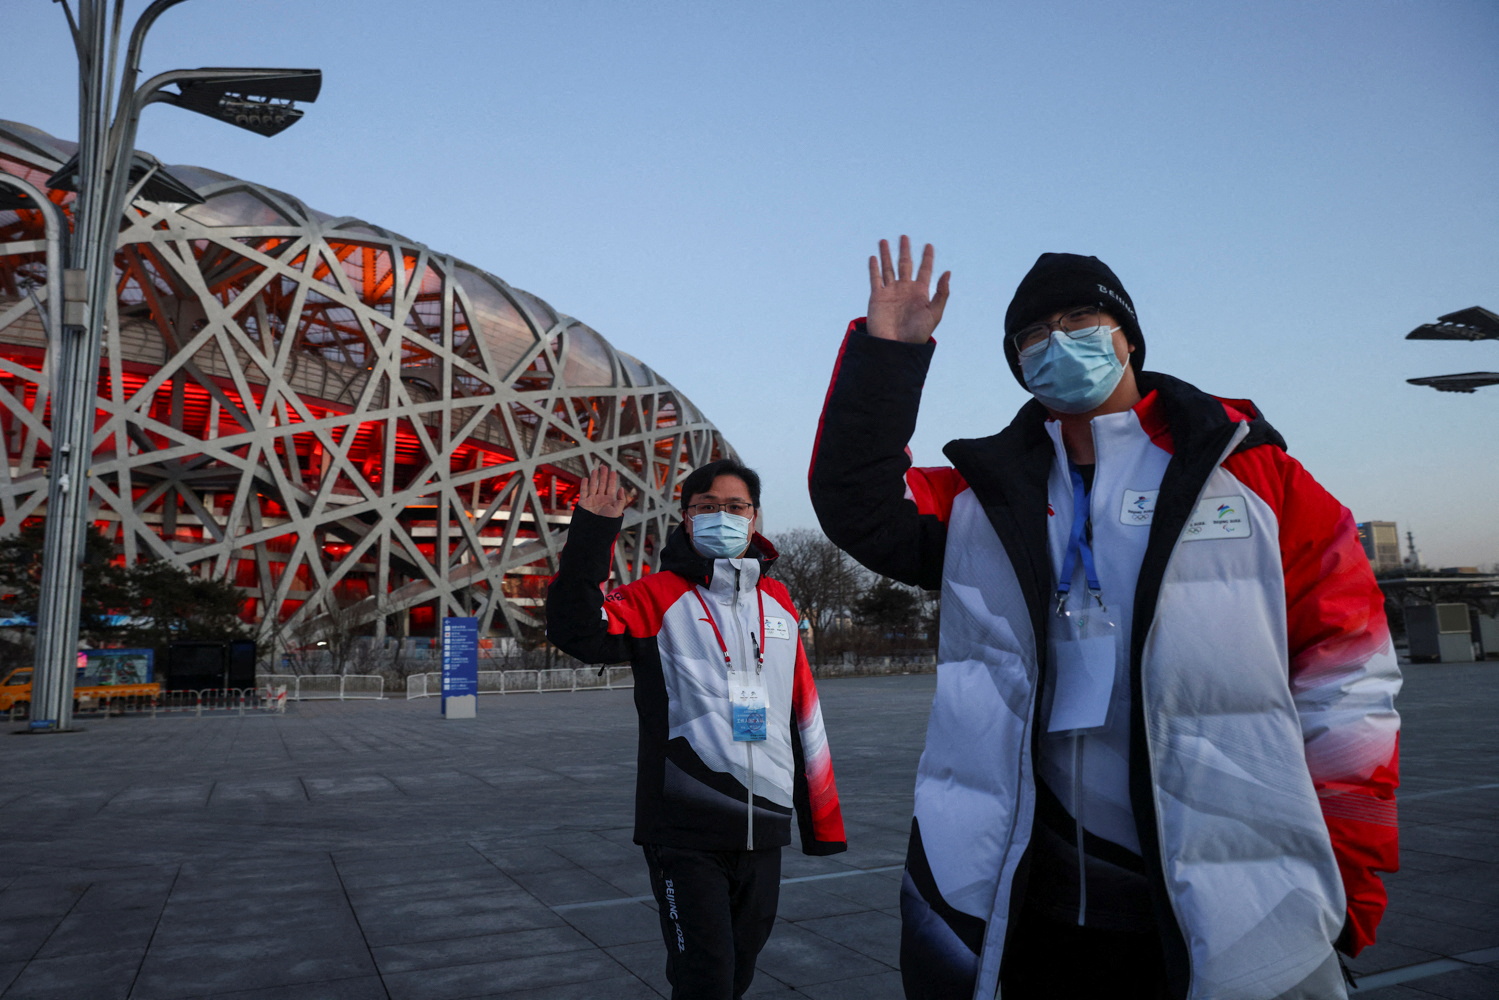 Staff members of the Beijing Olympic Organising Committee stand in front of the National Stadium, or Bird's Nest, the venue scheduled to hold the opening and closing ceremony of the Beijing 2022 Winter Olympics in Beijing